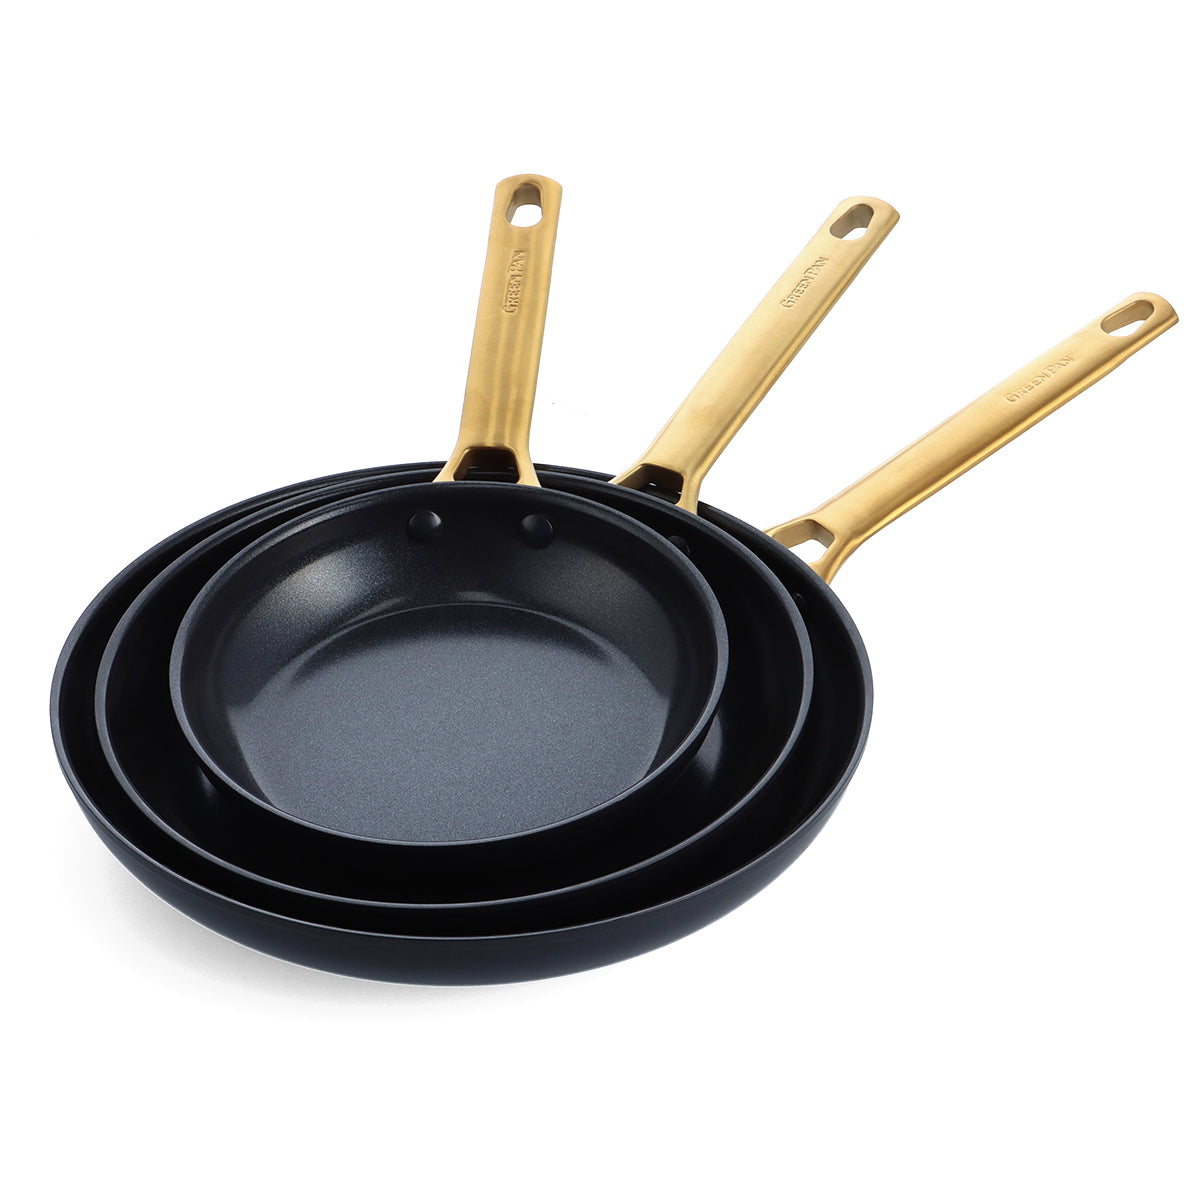 Reserve Ceramic Nonstick 8-Piece Cookware Set, Charcoal with Gold-Ton